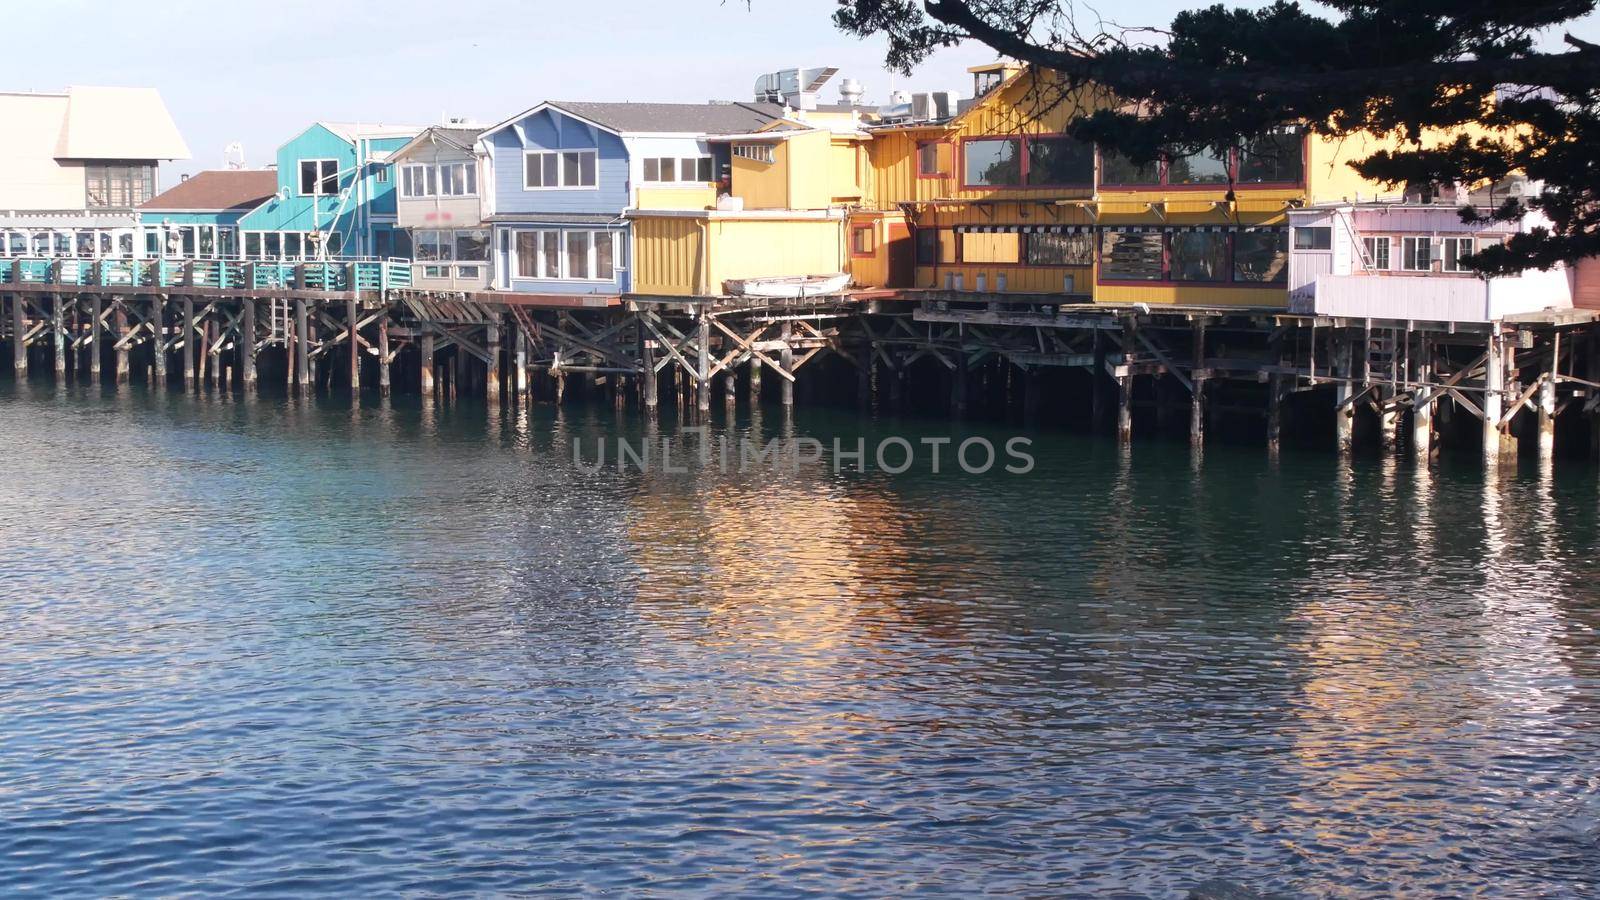 Colorful wooden houses on piles or pillars, Old Fisherman's Wharf, Monterey bay. by DogoraSun